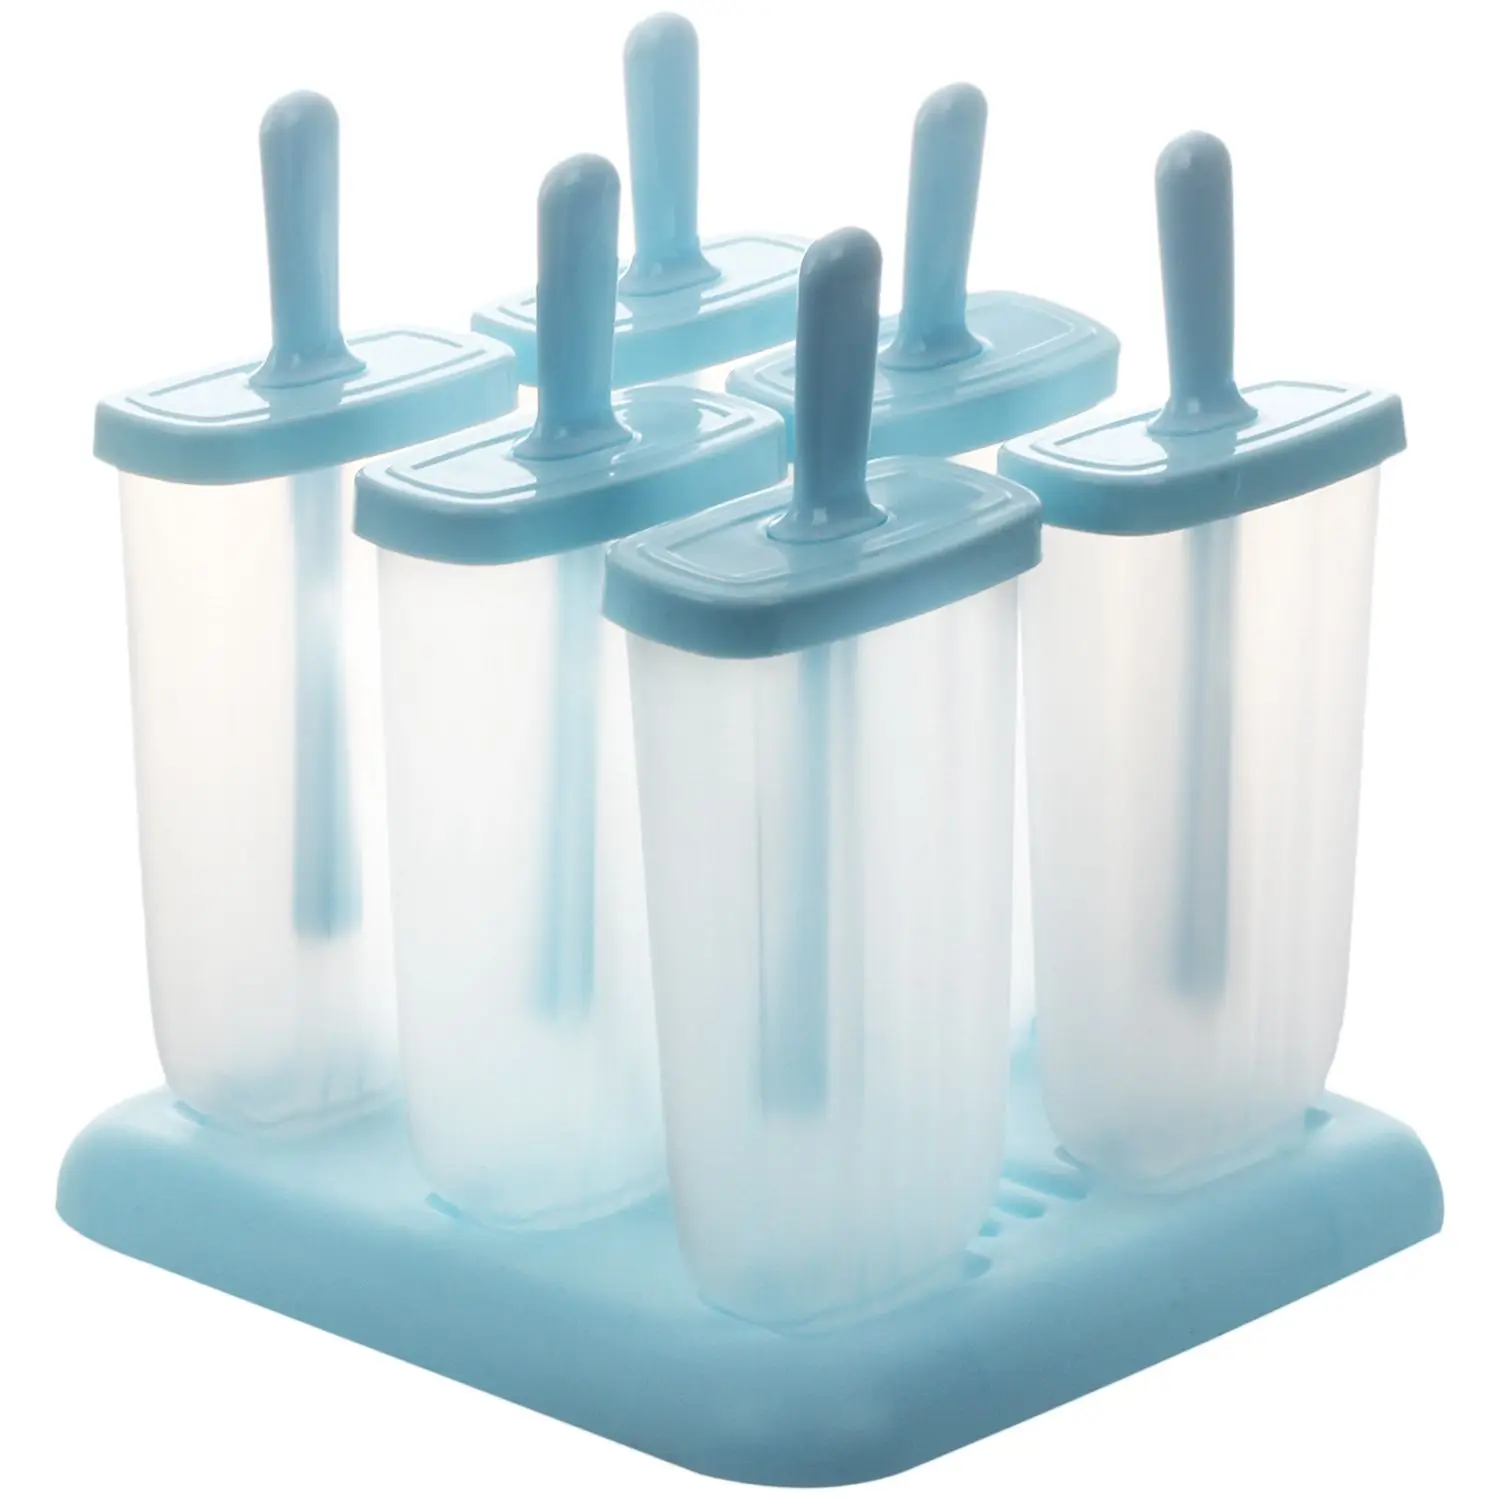 New-Pack 6 Popsicle Cream Glacee molds | Дом и сад